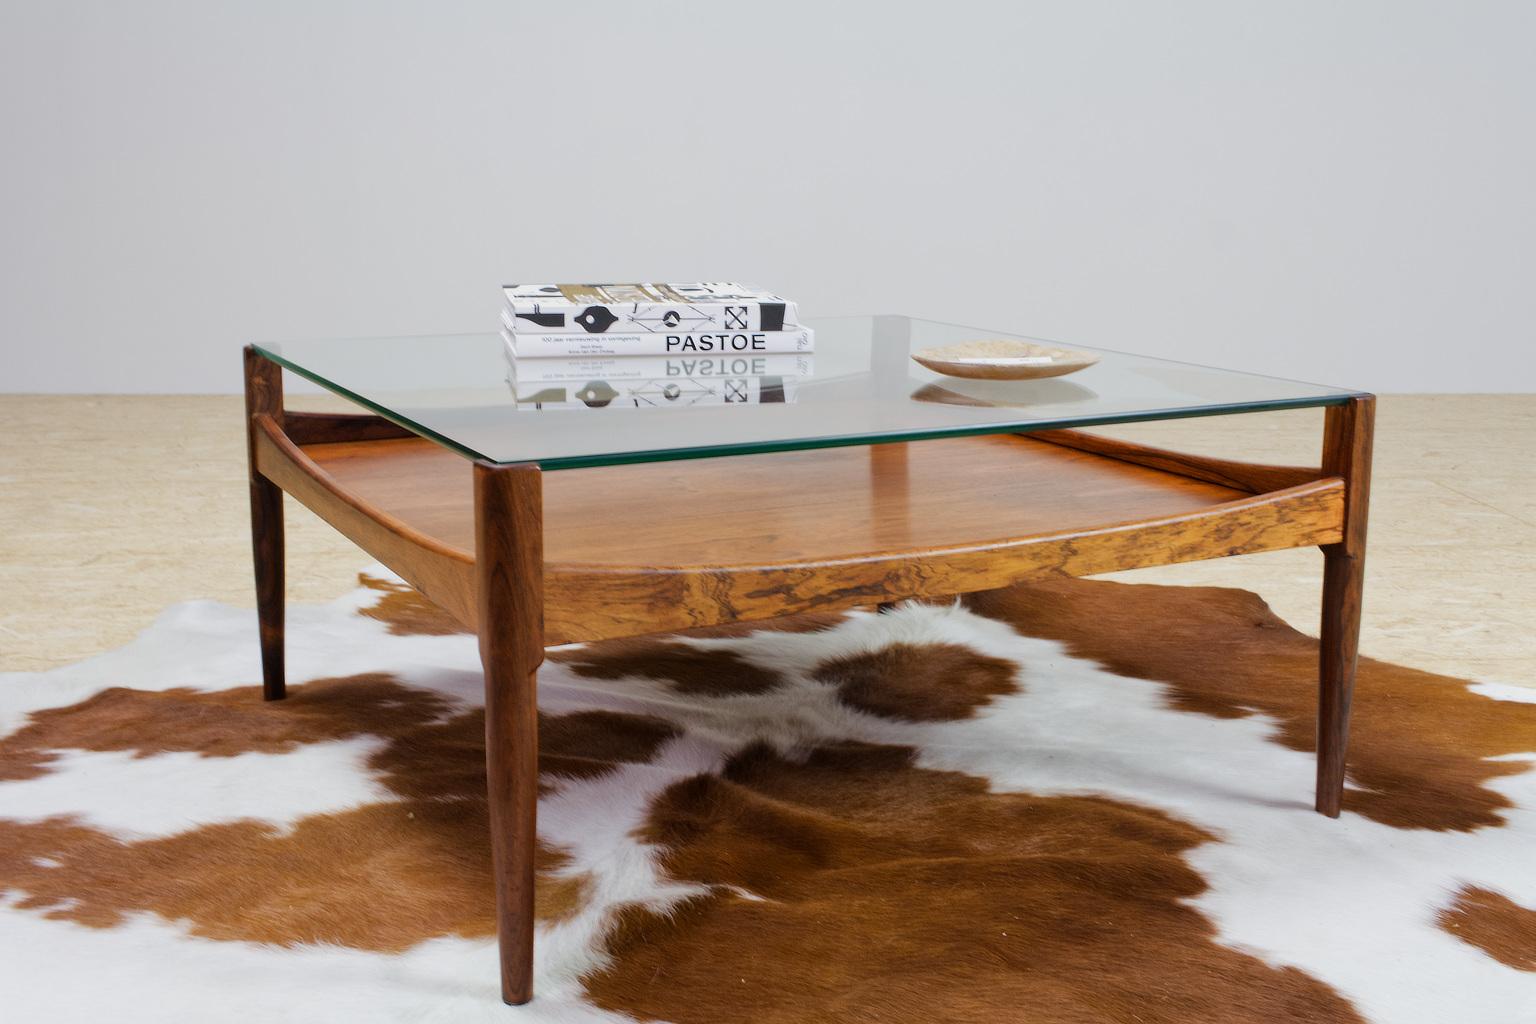 A great example of Scandinavian elegance. This rosewood and glass coffee table by Danish designer Kristian Vedel is a great blend of style, functionality and playful form. The listed item is made of solid rosewood and 8mm / 0.31inch glass with